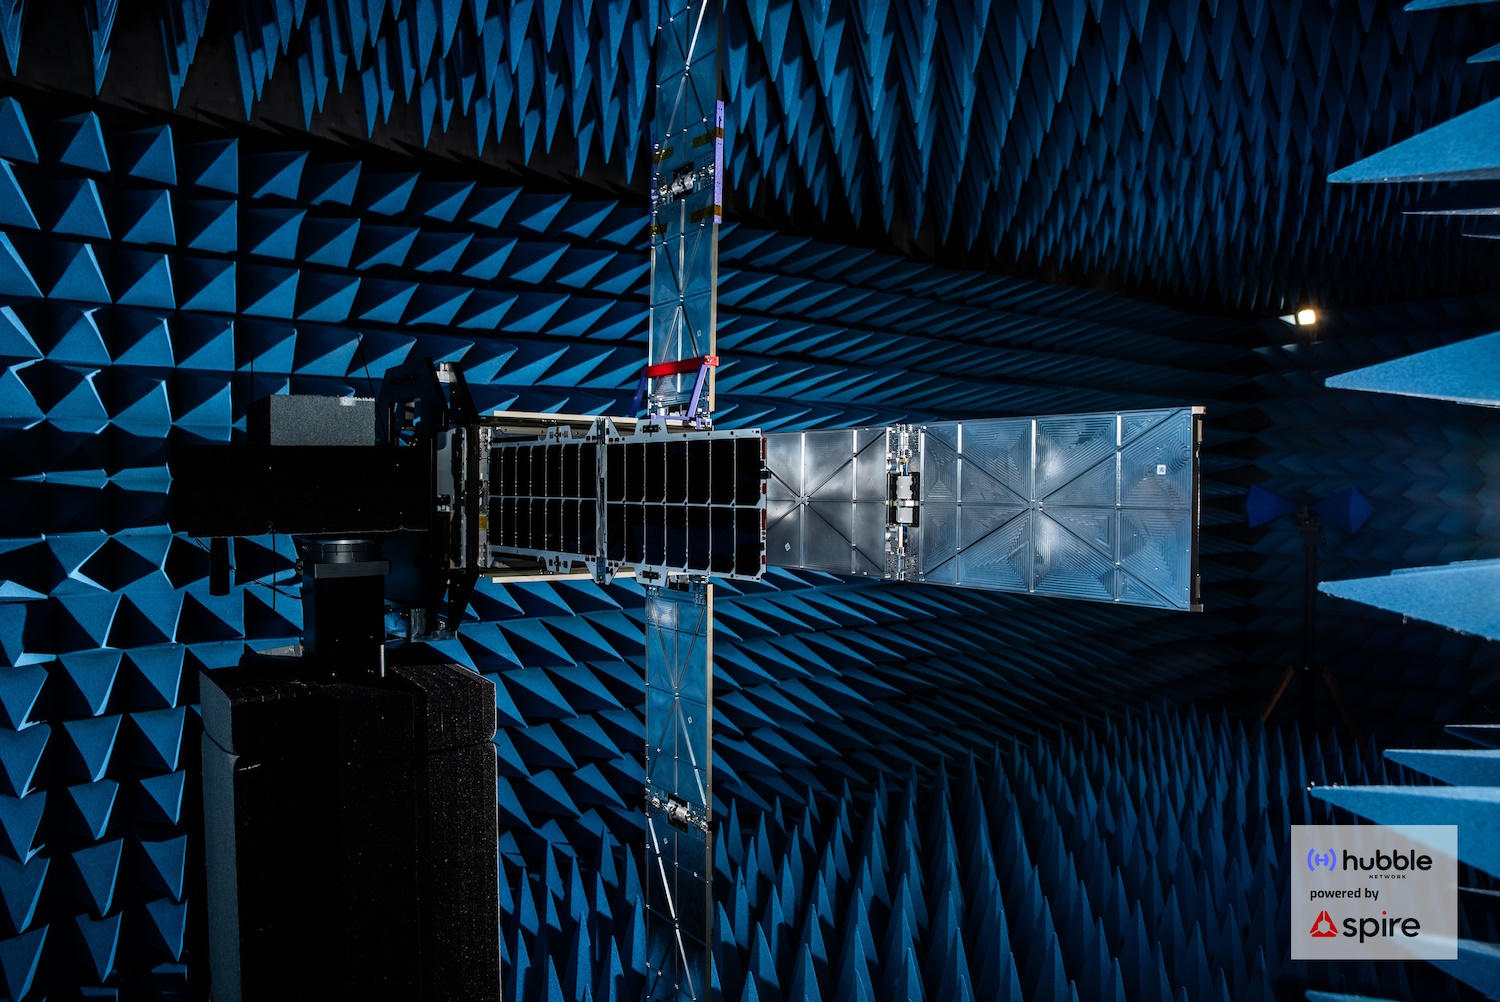 Hubble Network makes Bluetooth connection with a satellite for the first time